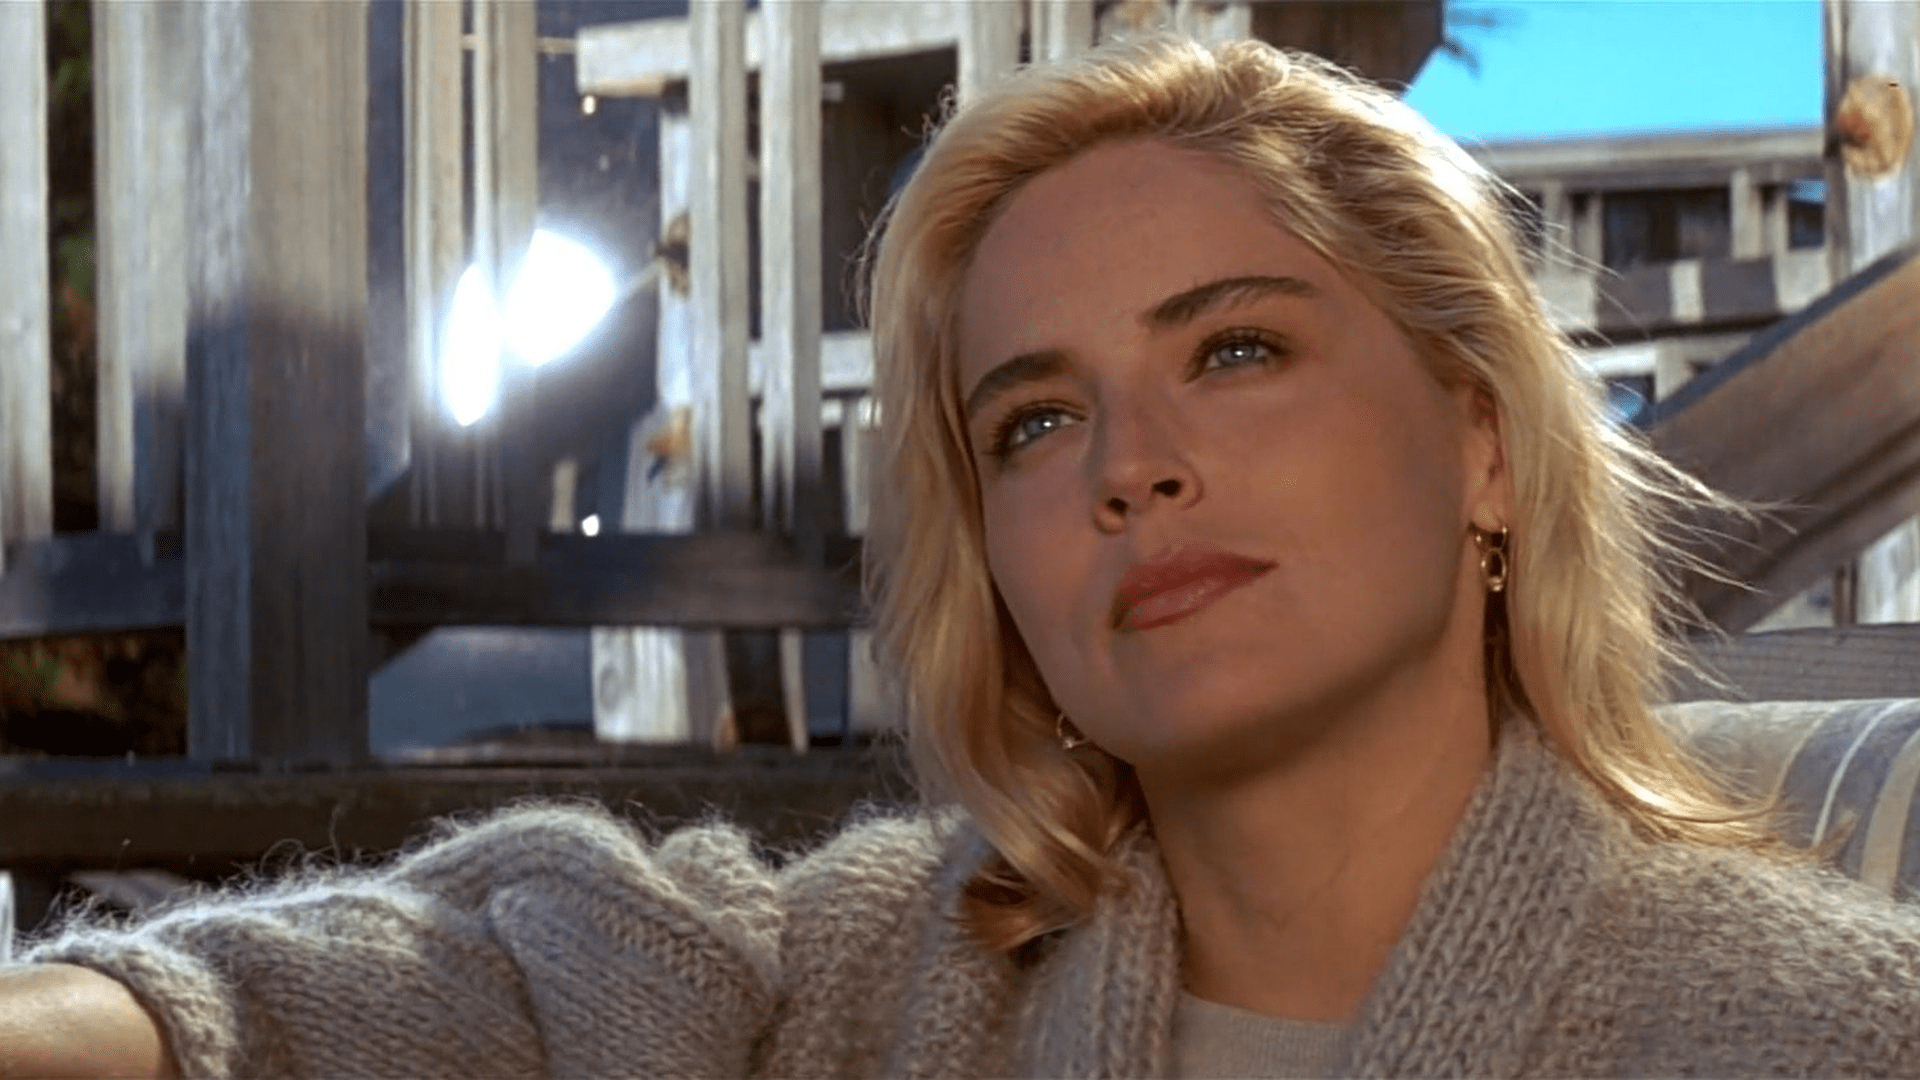 Sharon Stone Says Filming Basic Instinct Was a 'Scary Journey,' Required Looking at 'Dark Parts' of Herself